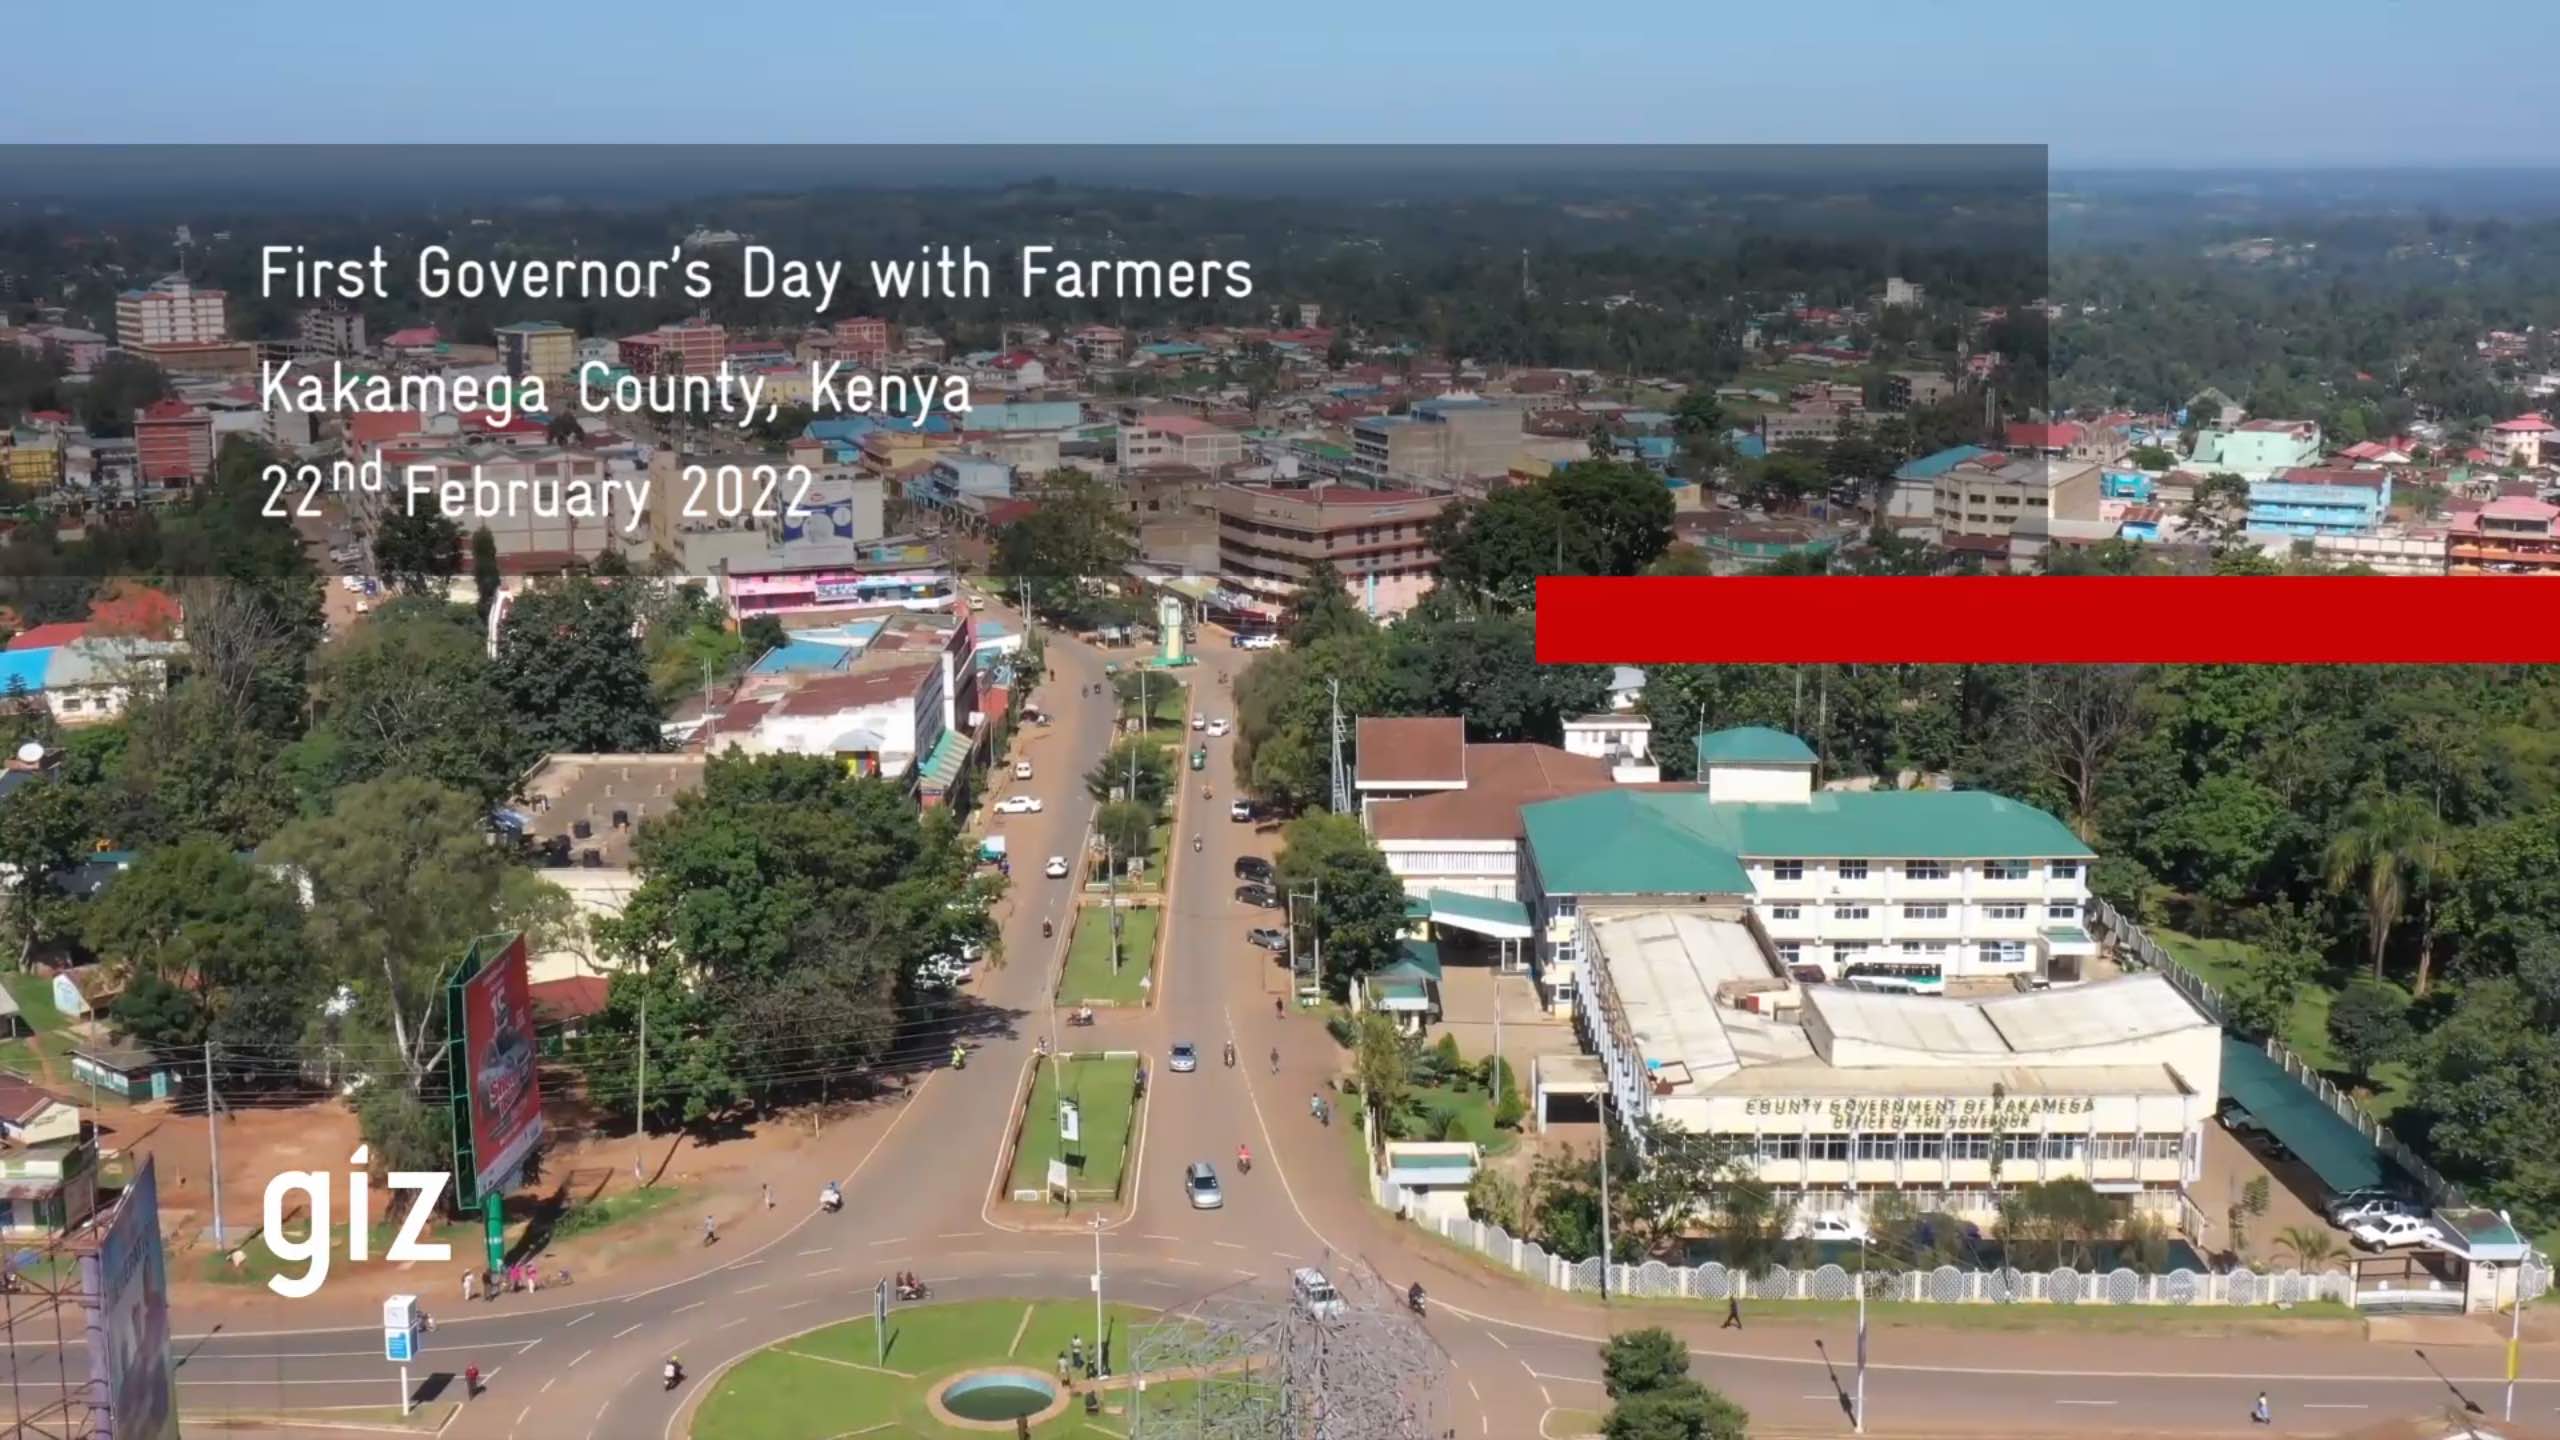 First Governor's Day with Farmers - Kakamega County, Kenya